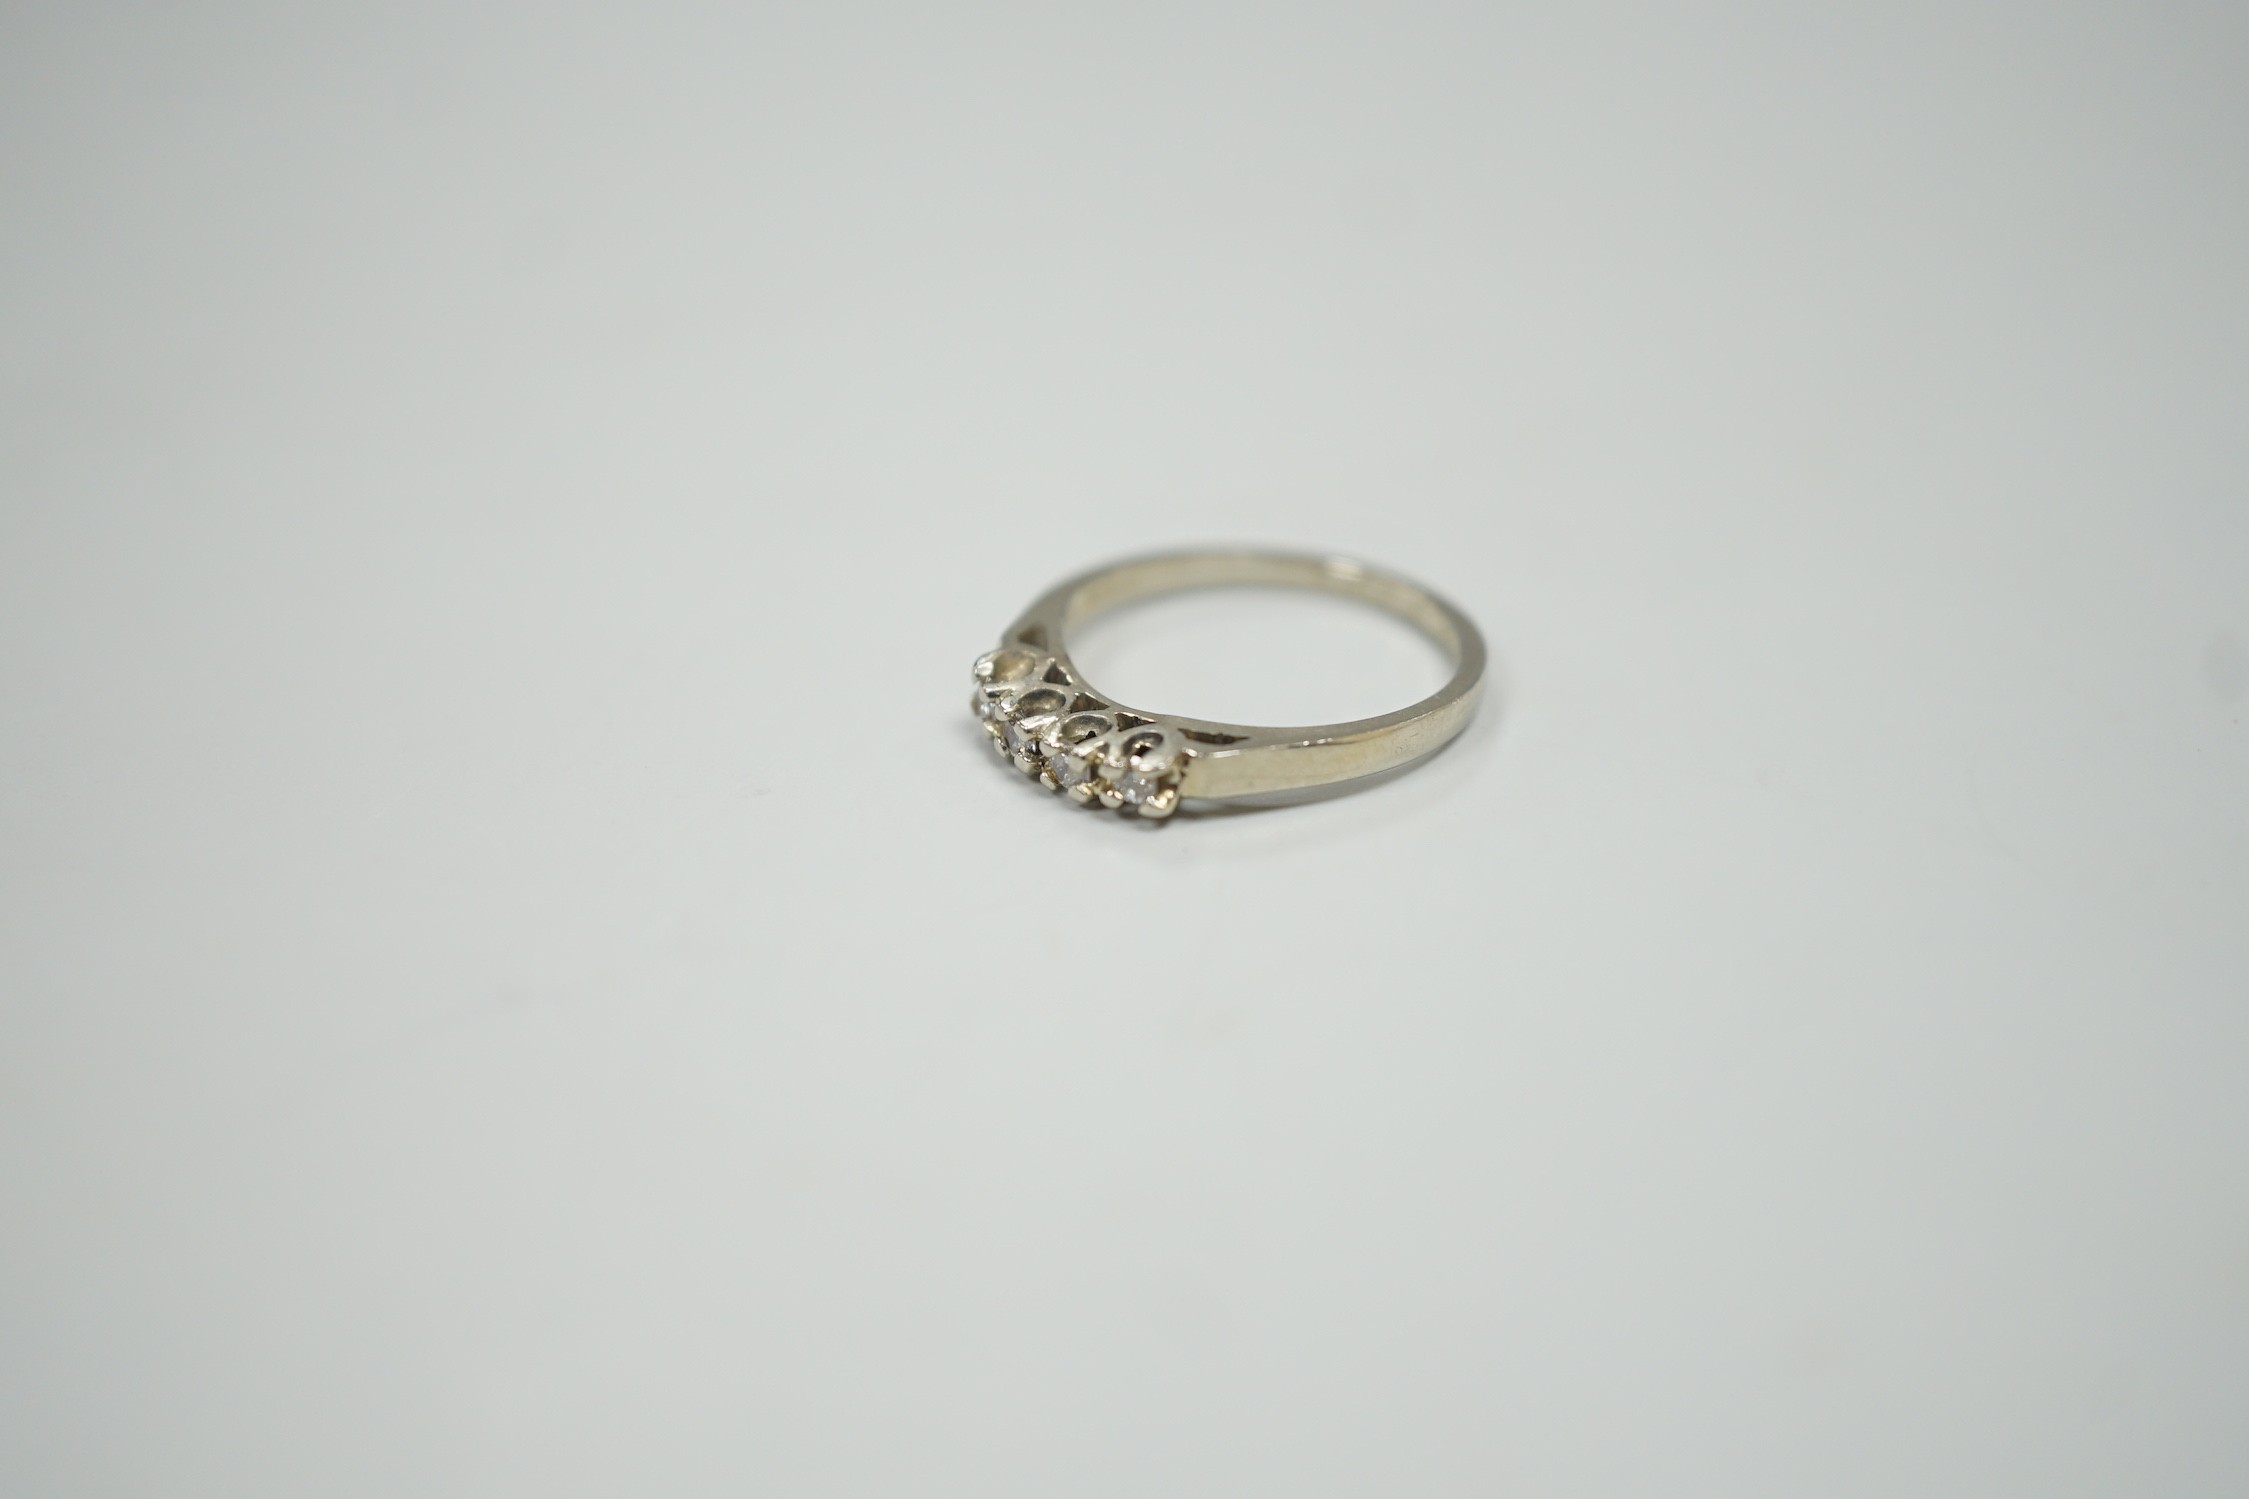 A Canadian Birks 18k white metal and four stone diamond set ring, size I, gross weight 1.8 grams.